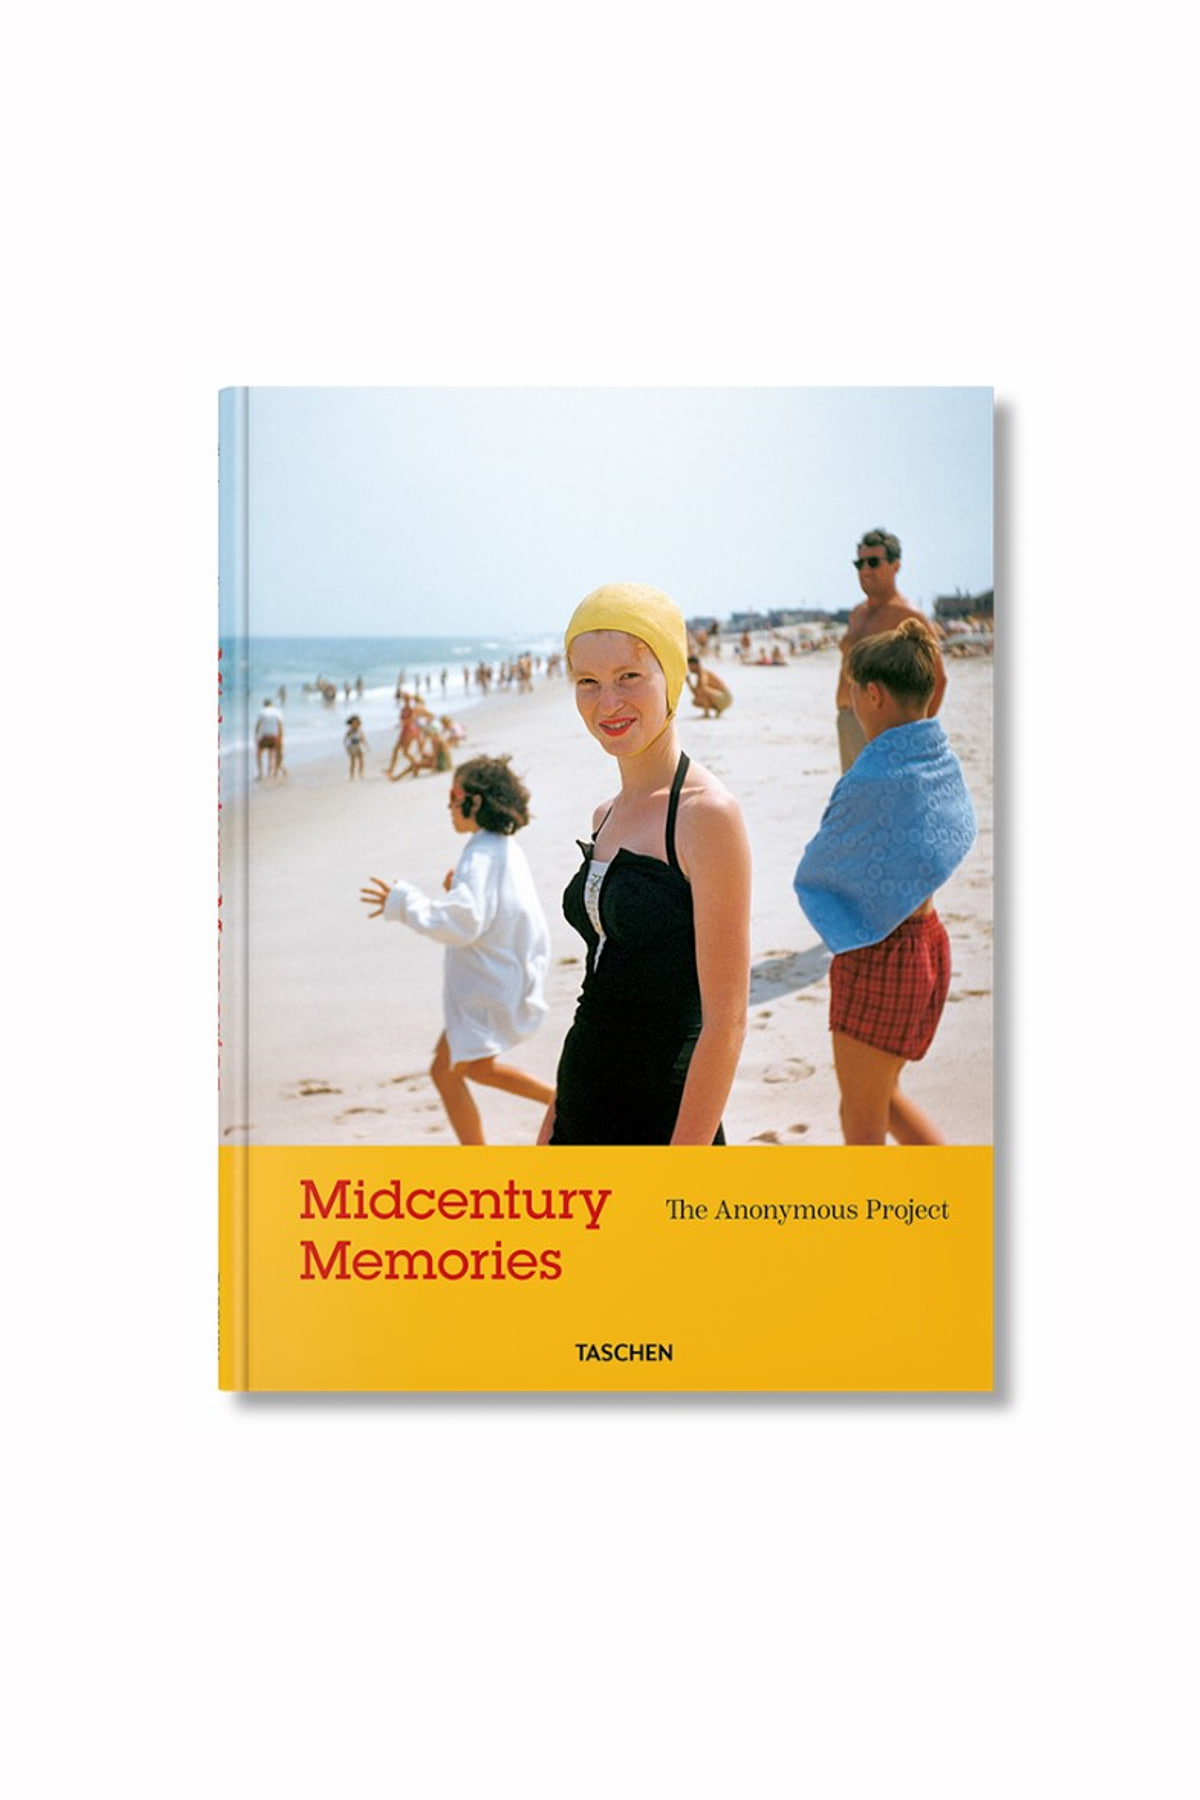 [TASCHEN] Midcentury Memories. The Anonymous Project